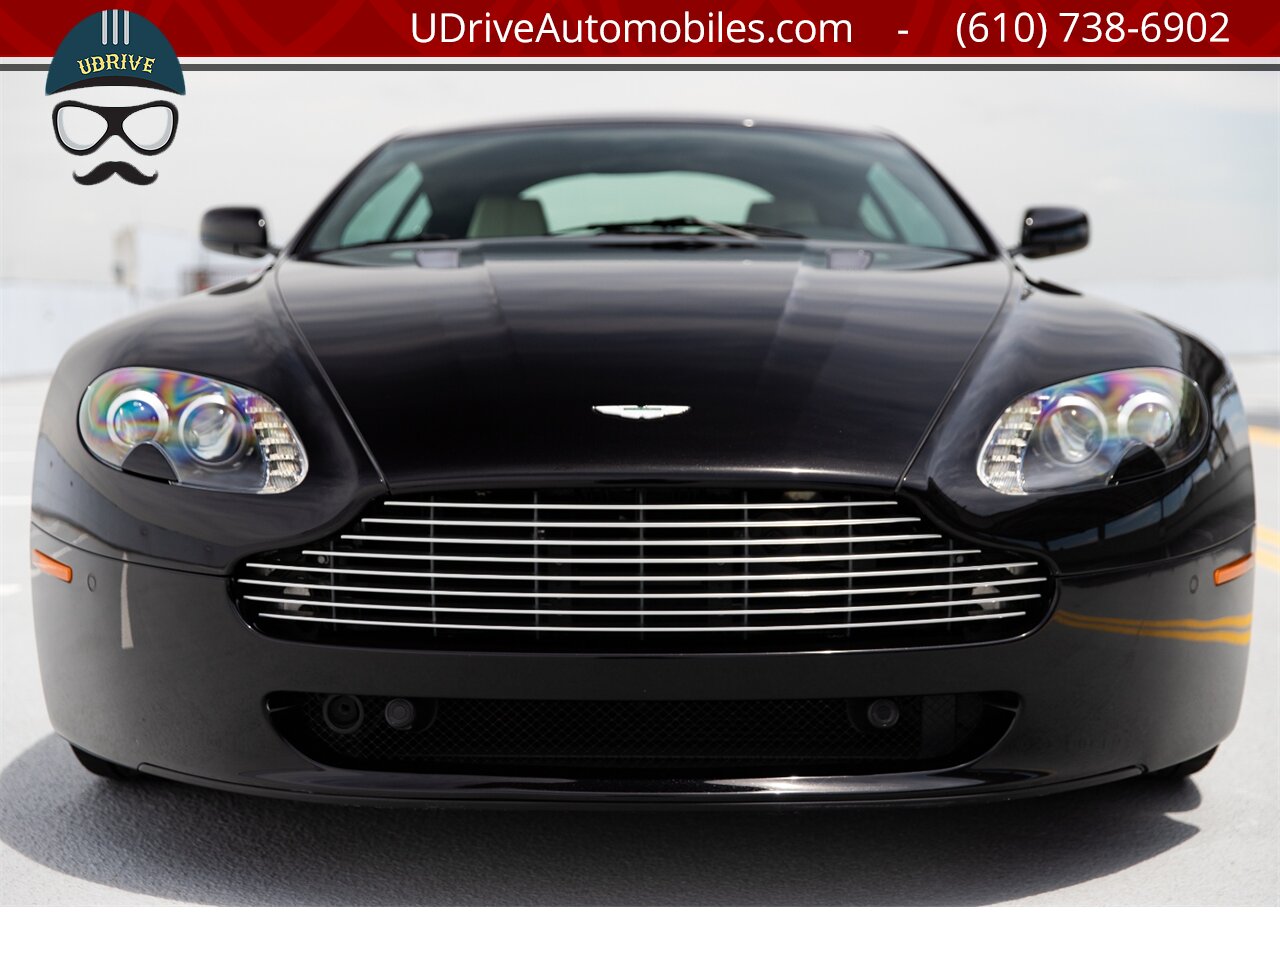 2009 Aston Martin Vantage 6 Speed Manual 1 Owner 12k Miles Sprts Pack NAV  $136,470 MSRP Red Calipers - Photo 14 - West Chester, PA 19382